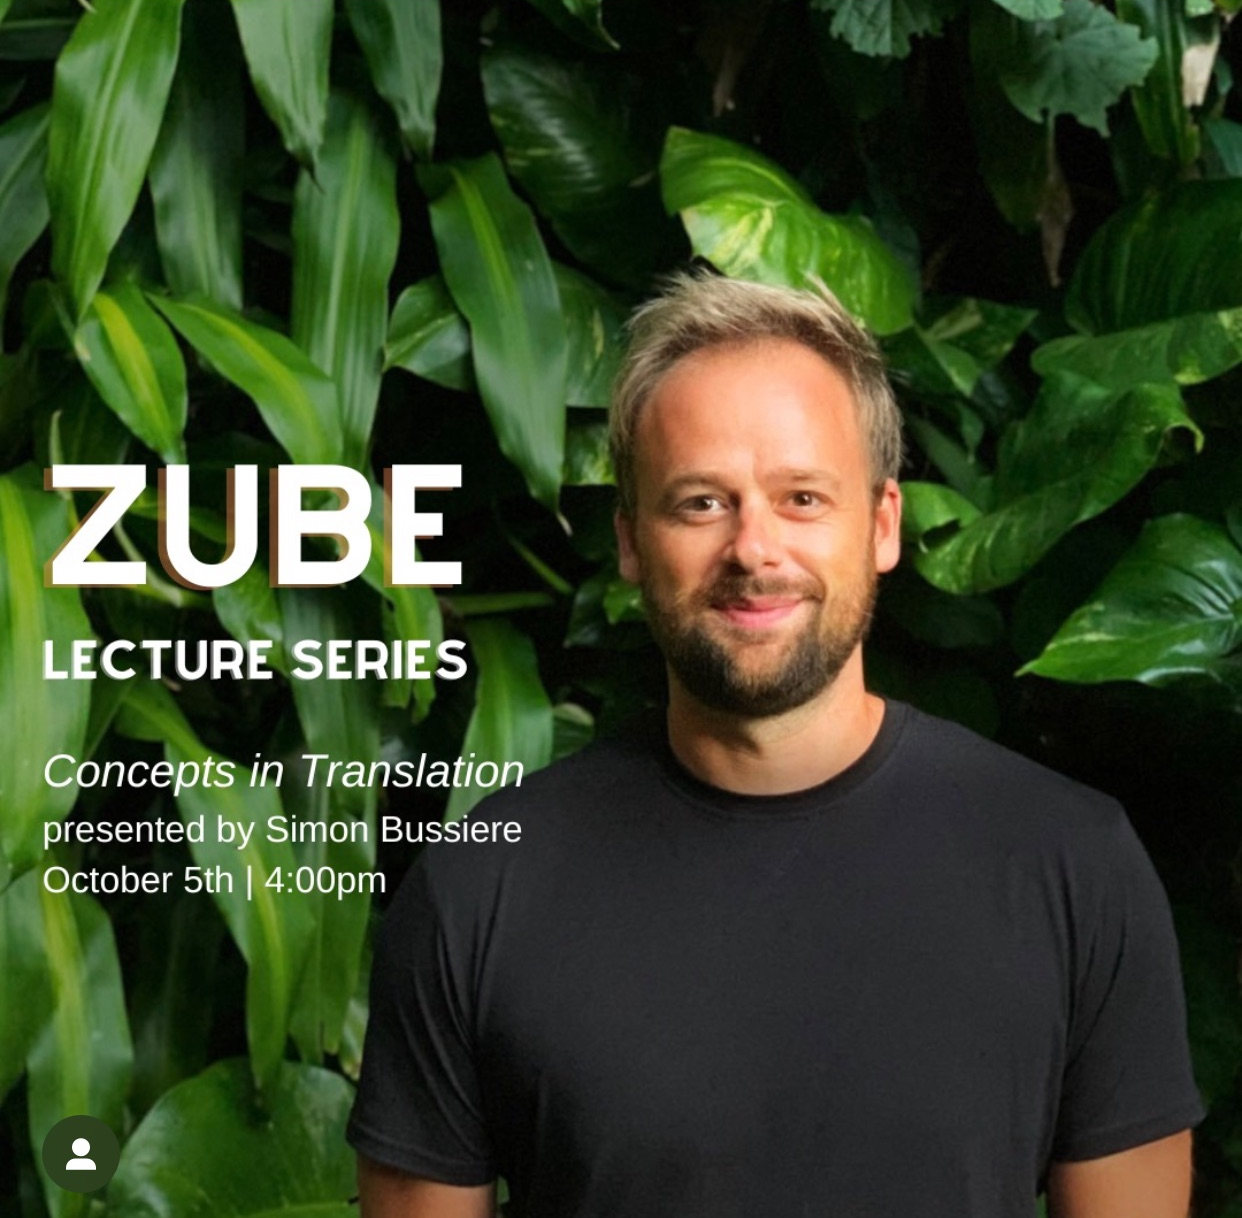 Simon Bussiere on the UMass Zube Lecture Series - “Concepts” in Translation